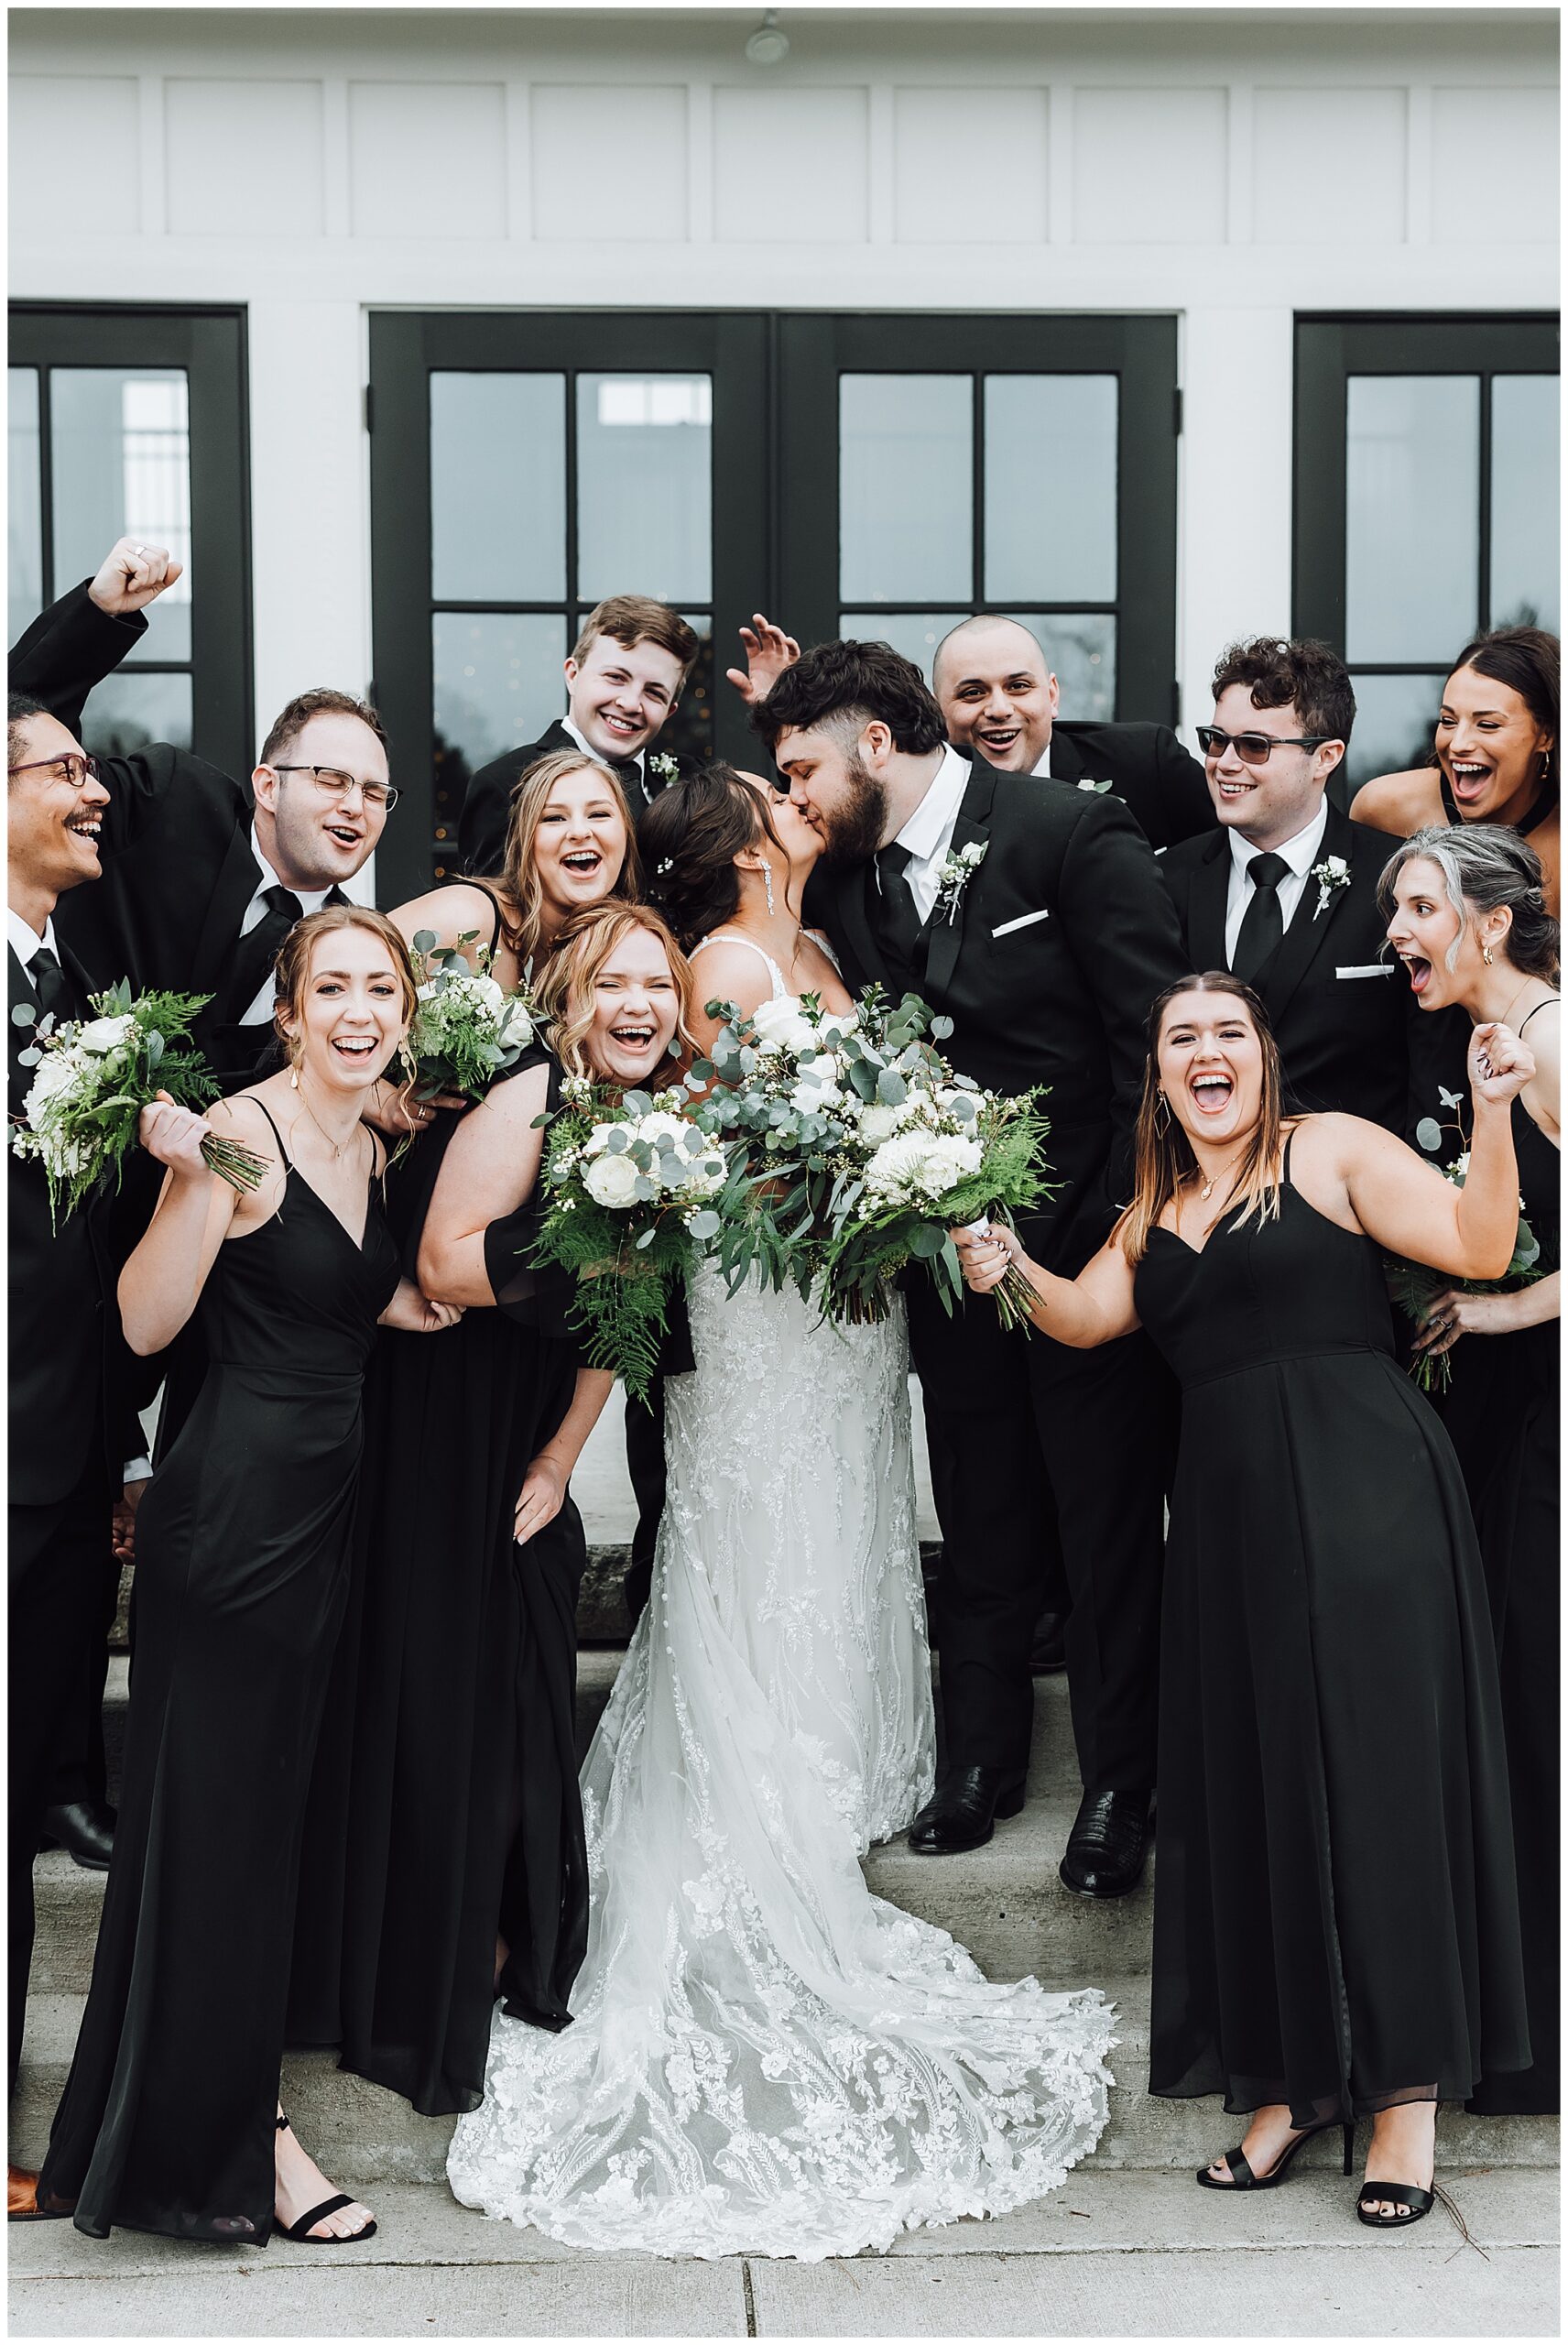 The whole wedding party celebrates as the bride and groom kiss on stairs